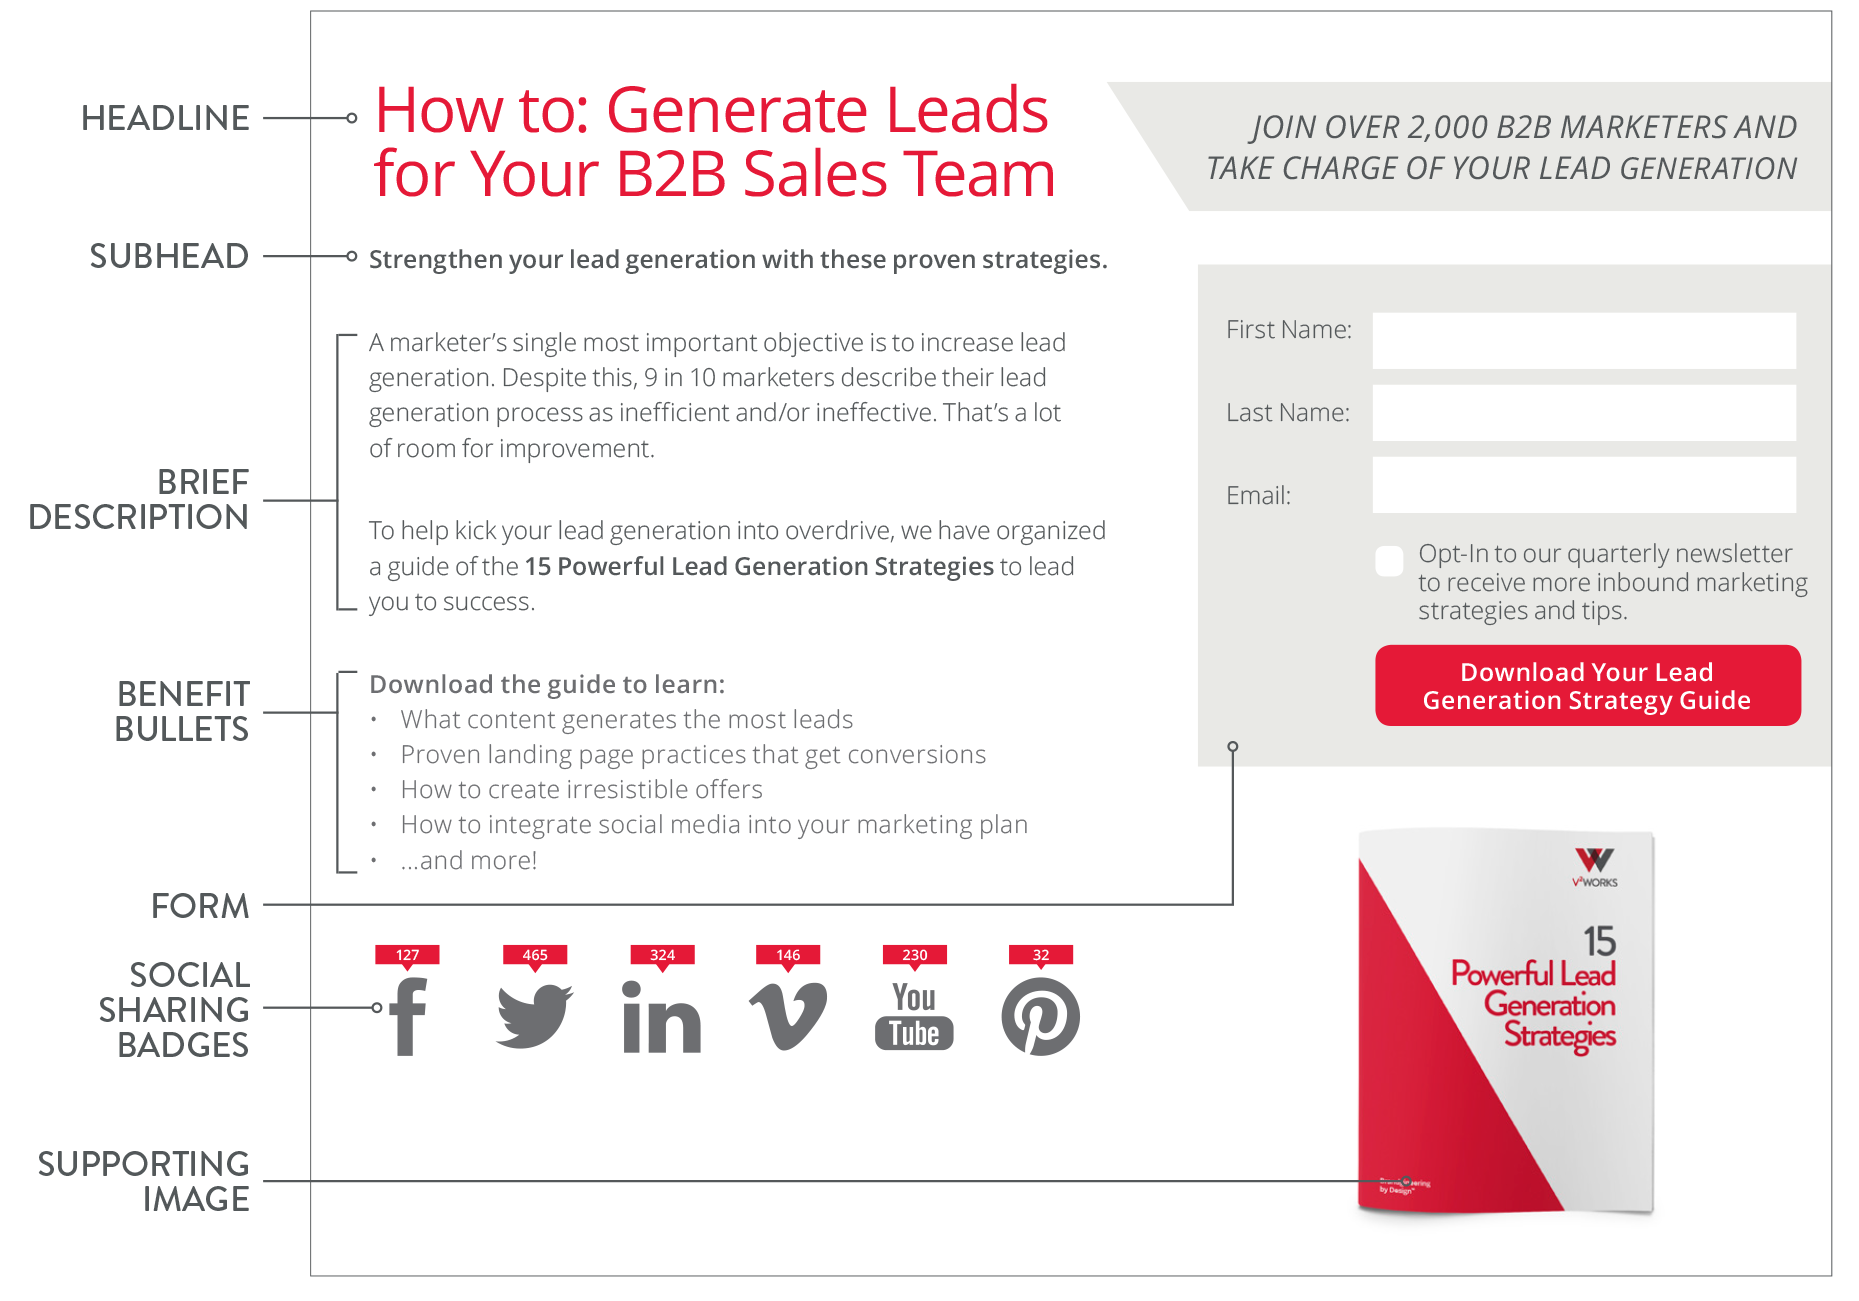 Keys to an effective landing page for generating more leads